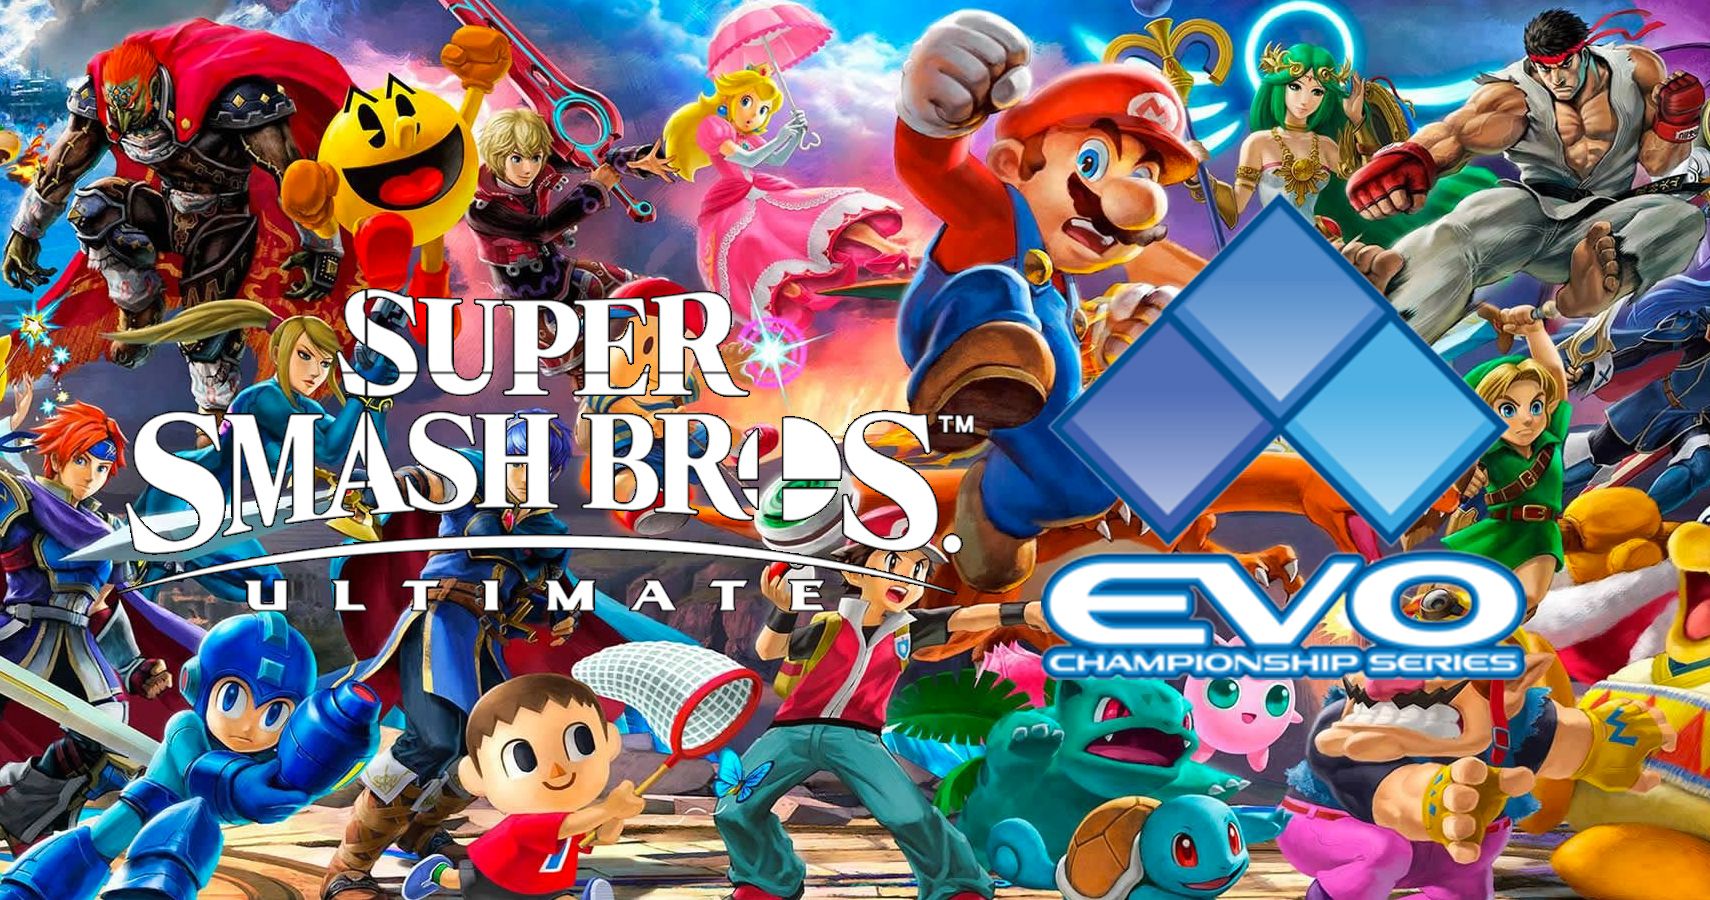 Surprising No One, Smash Ultimate Is The MostRegistered Evo 2019 Game